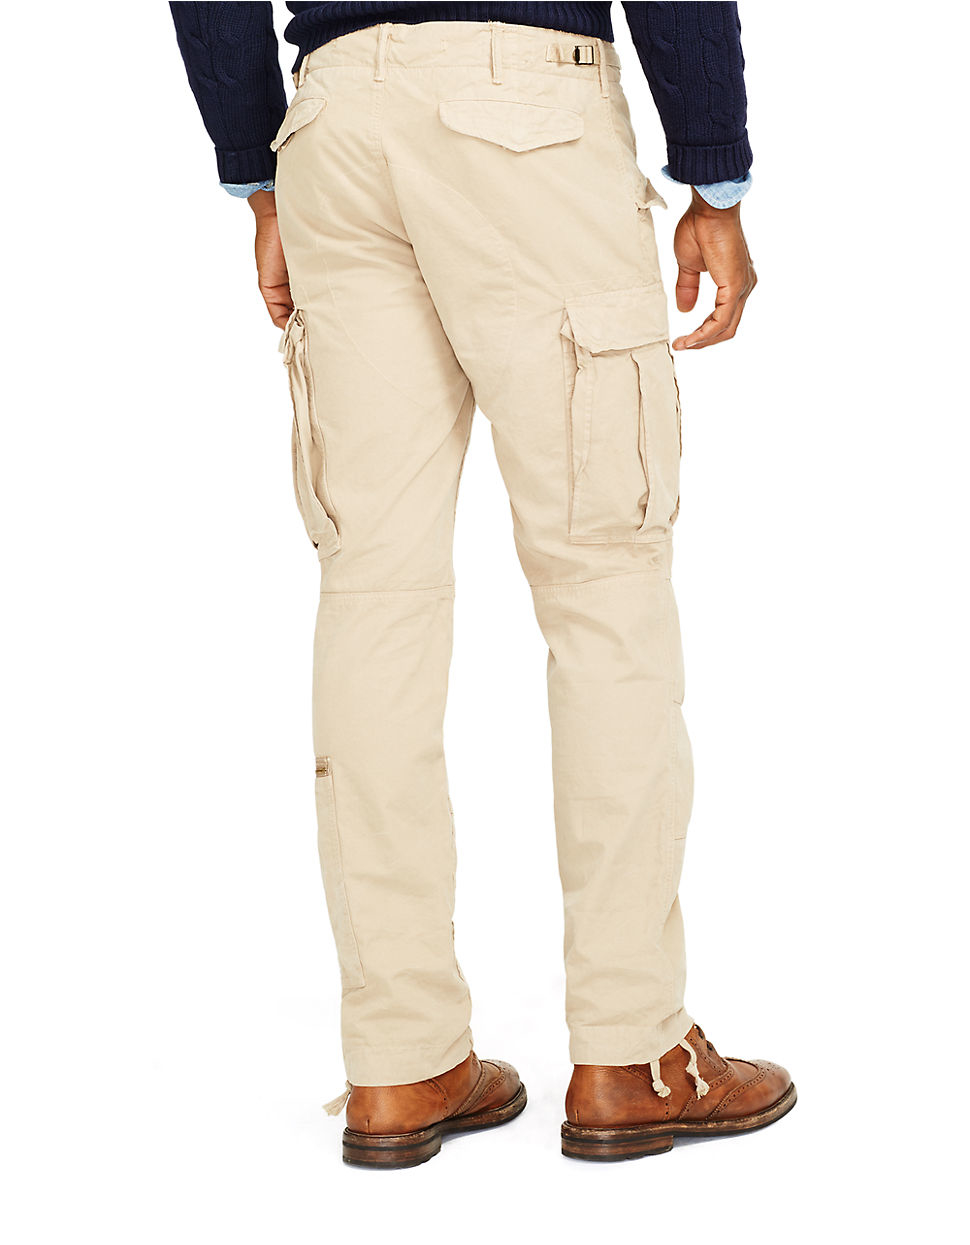 Polo Ralph Lauren Cotton Military Cargo Pants in Natural for Men - Lyst